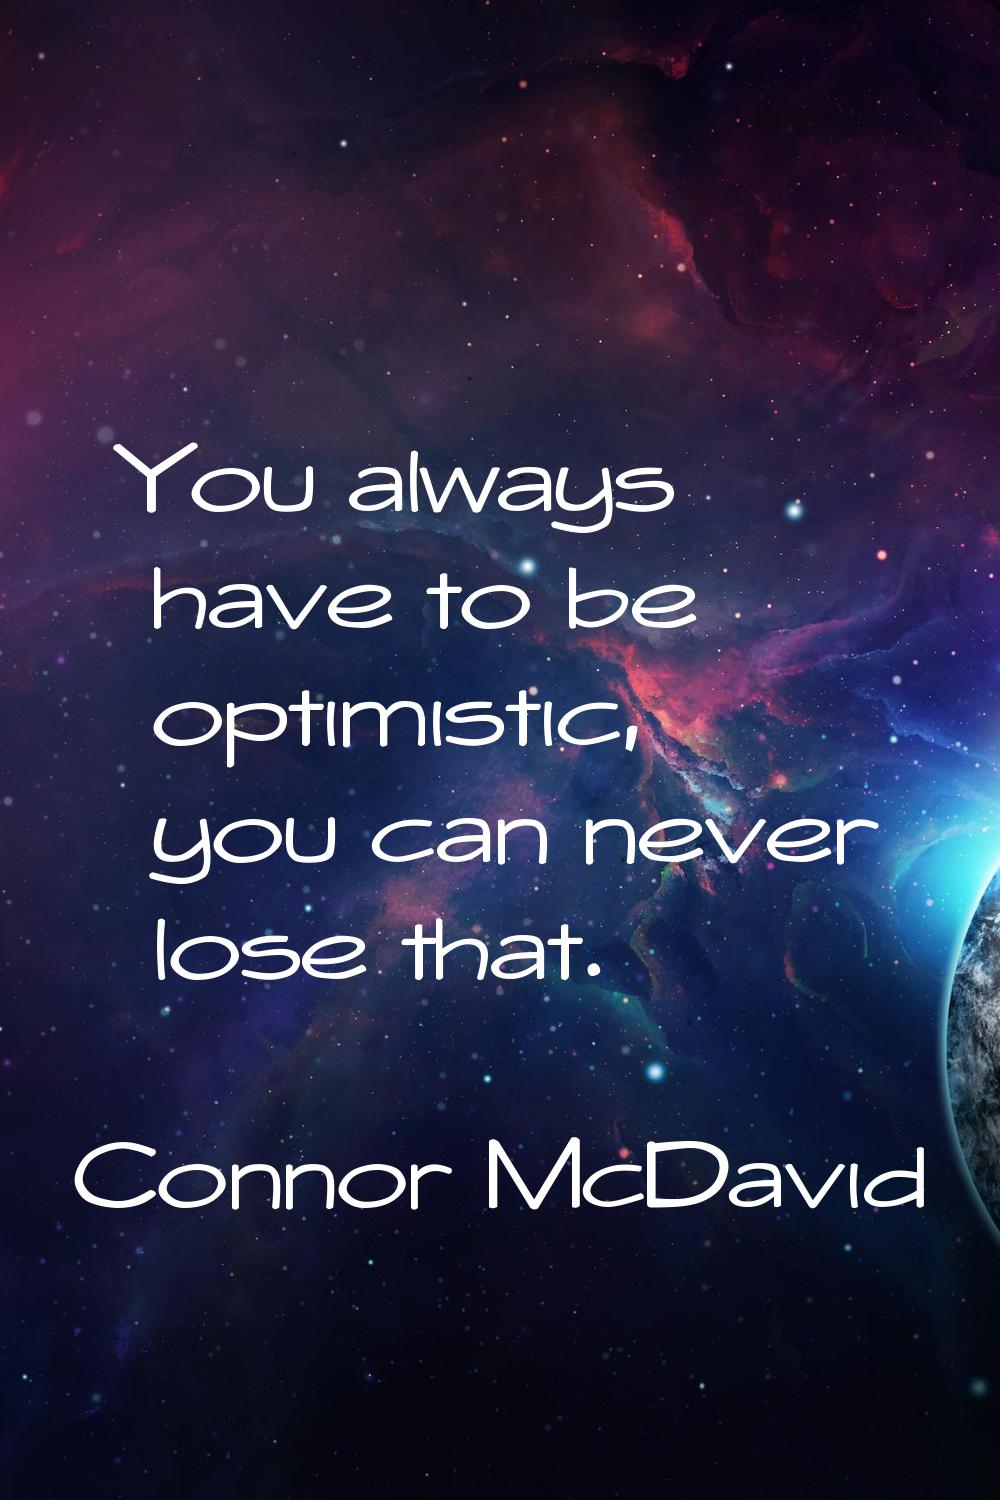 You always have to be optimistic, you can never lose that.